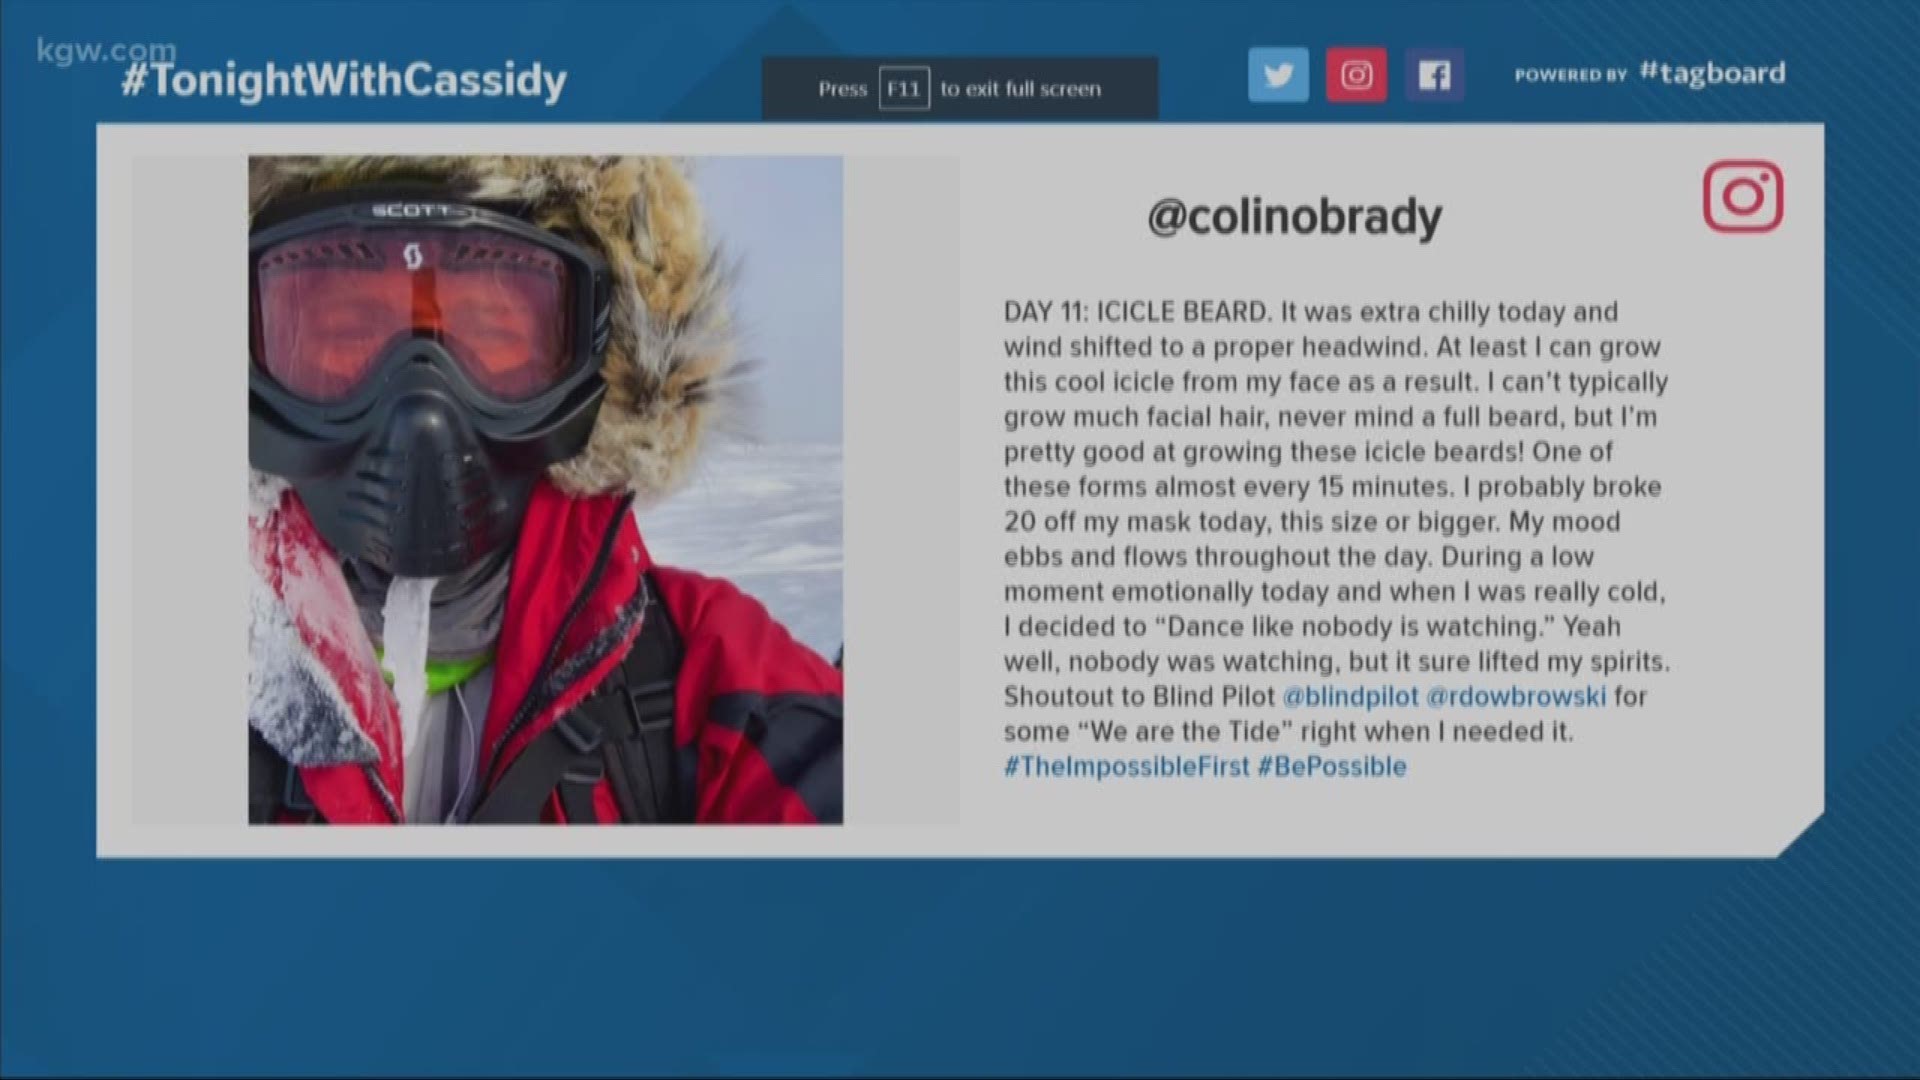 We're checking in on Colin O'Brady and his amazing adventure to cross Antarctica in 70 days.
colinobrady.com/theimpossiblefirst
#TonightwithCassidy